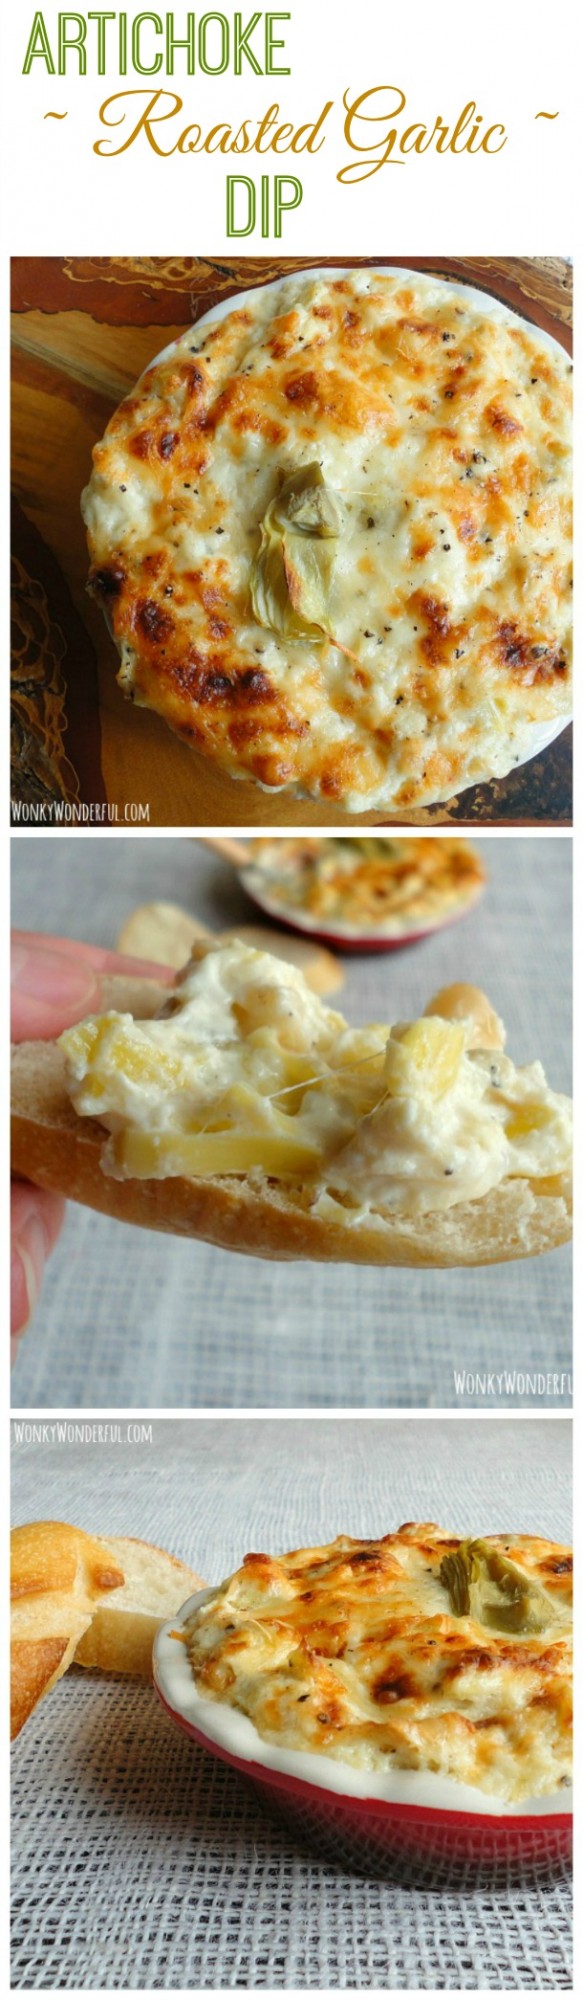 20 Delicious Appetizer and Dip Recipes  (2)